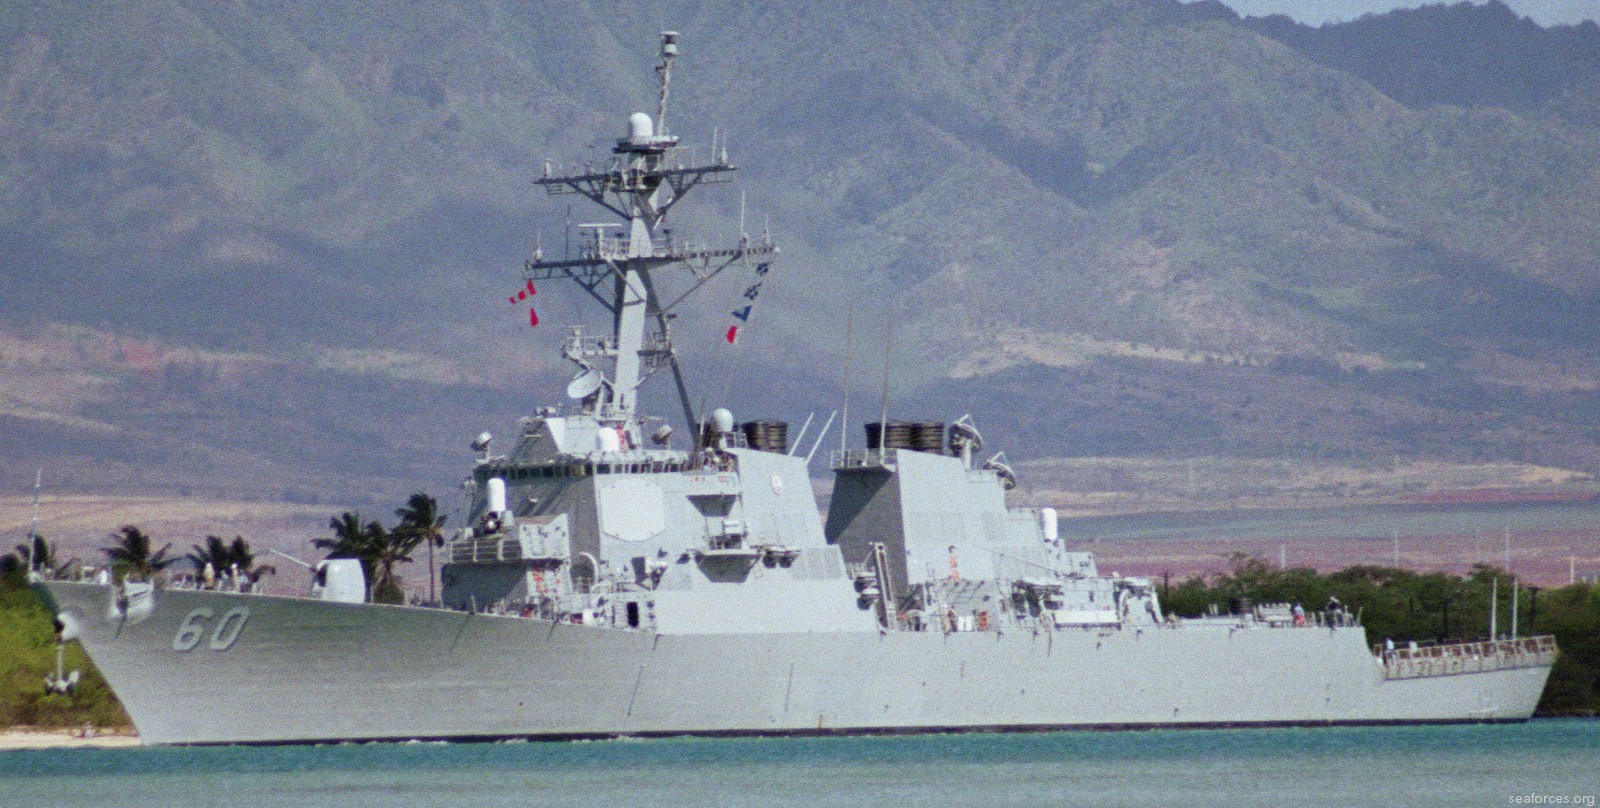 ddg-60 uss paul hamilton guided missile destroyer us navy 64